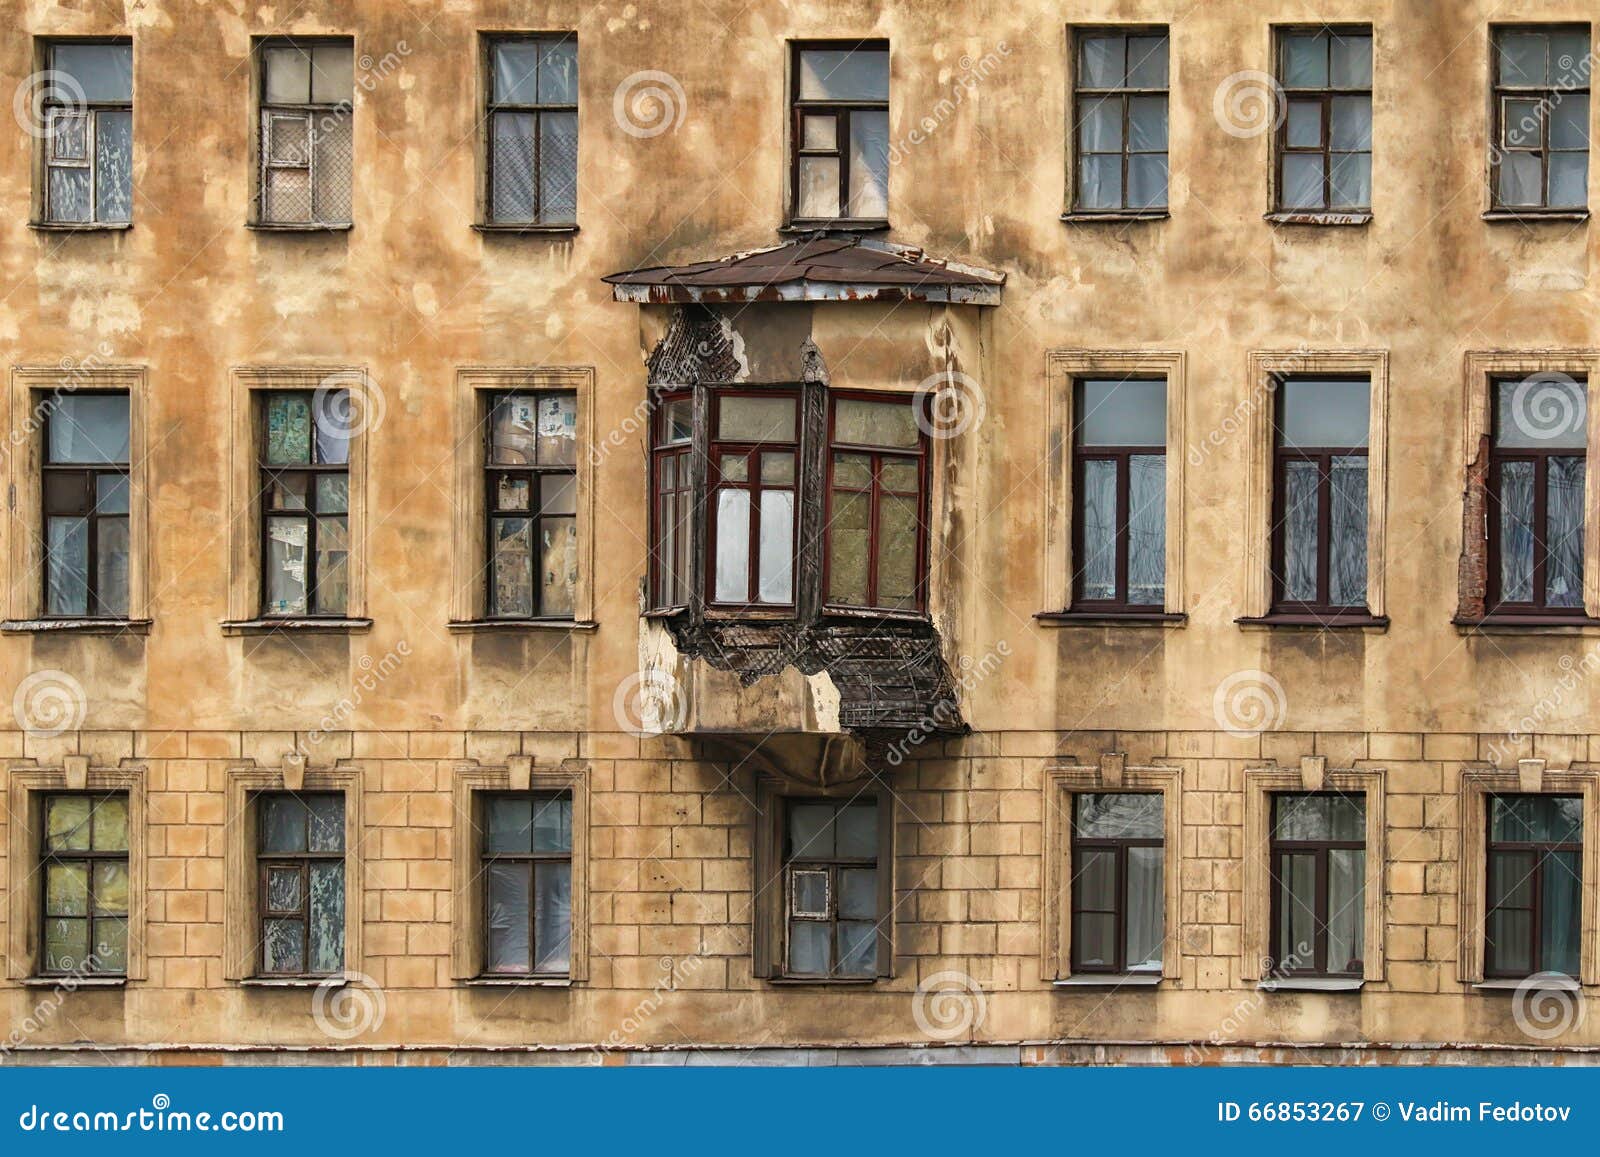 Windows In A Row And Bay Window On Facade Of Apartment ...